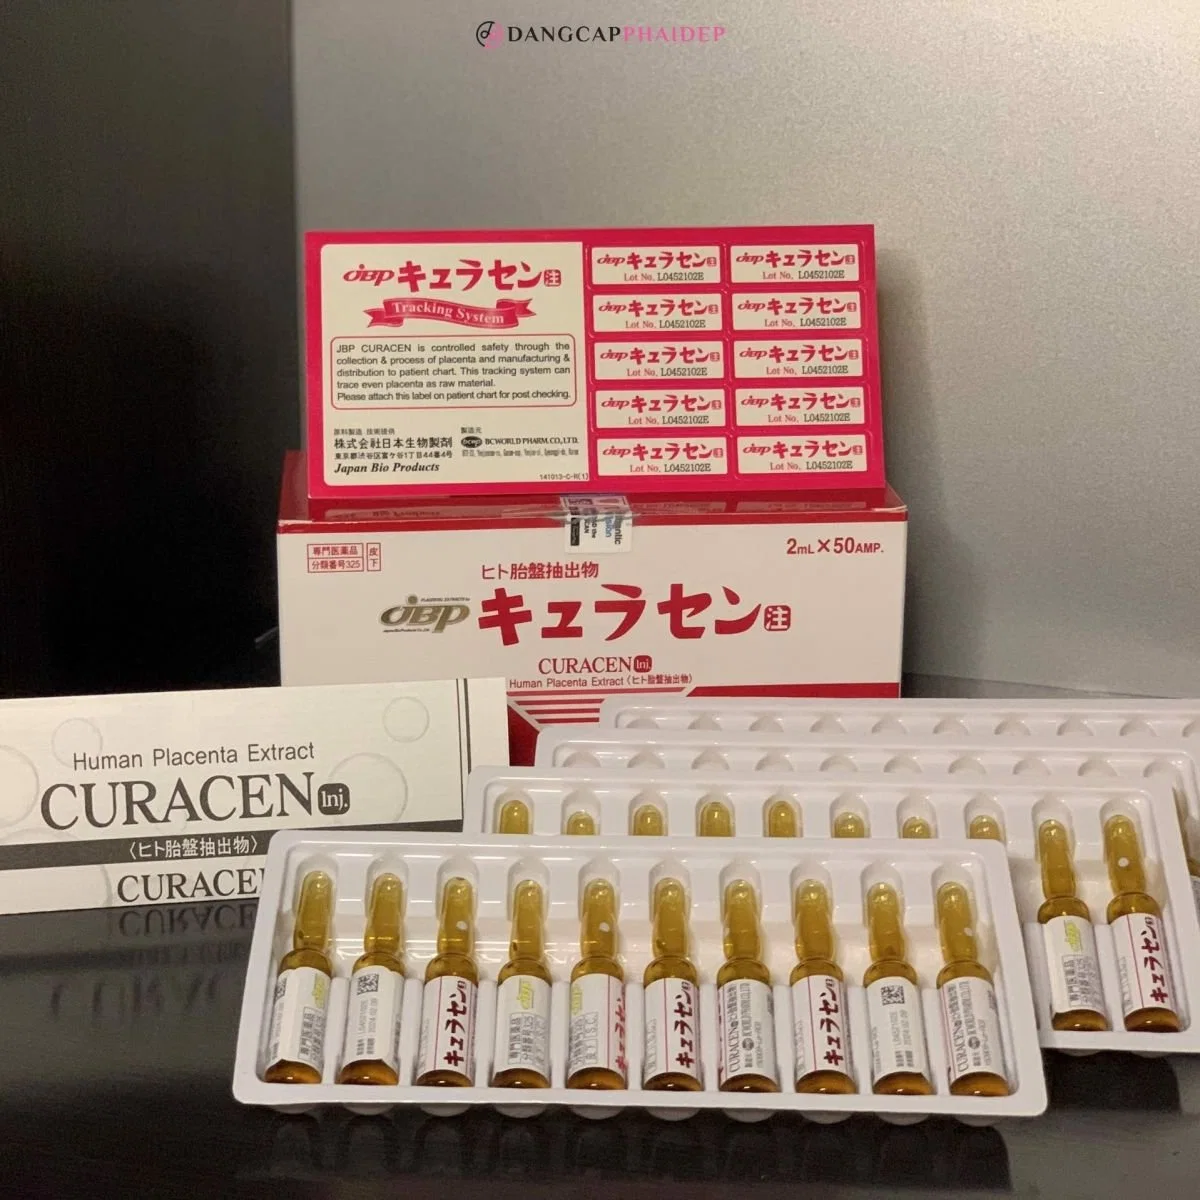 Jbp Curacen Placenta Glutathione Injection Human Placenta Extract 50amg Melsmon Forextract Smooth White Skin Placenta Polypeptide Injection